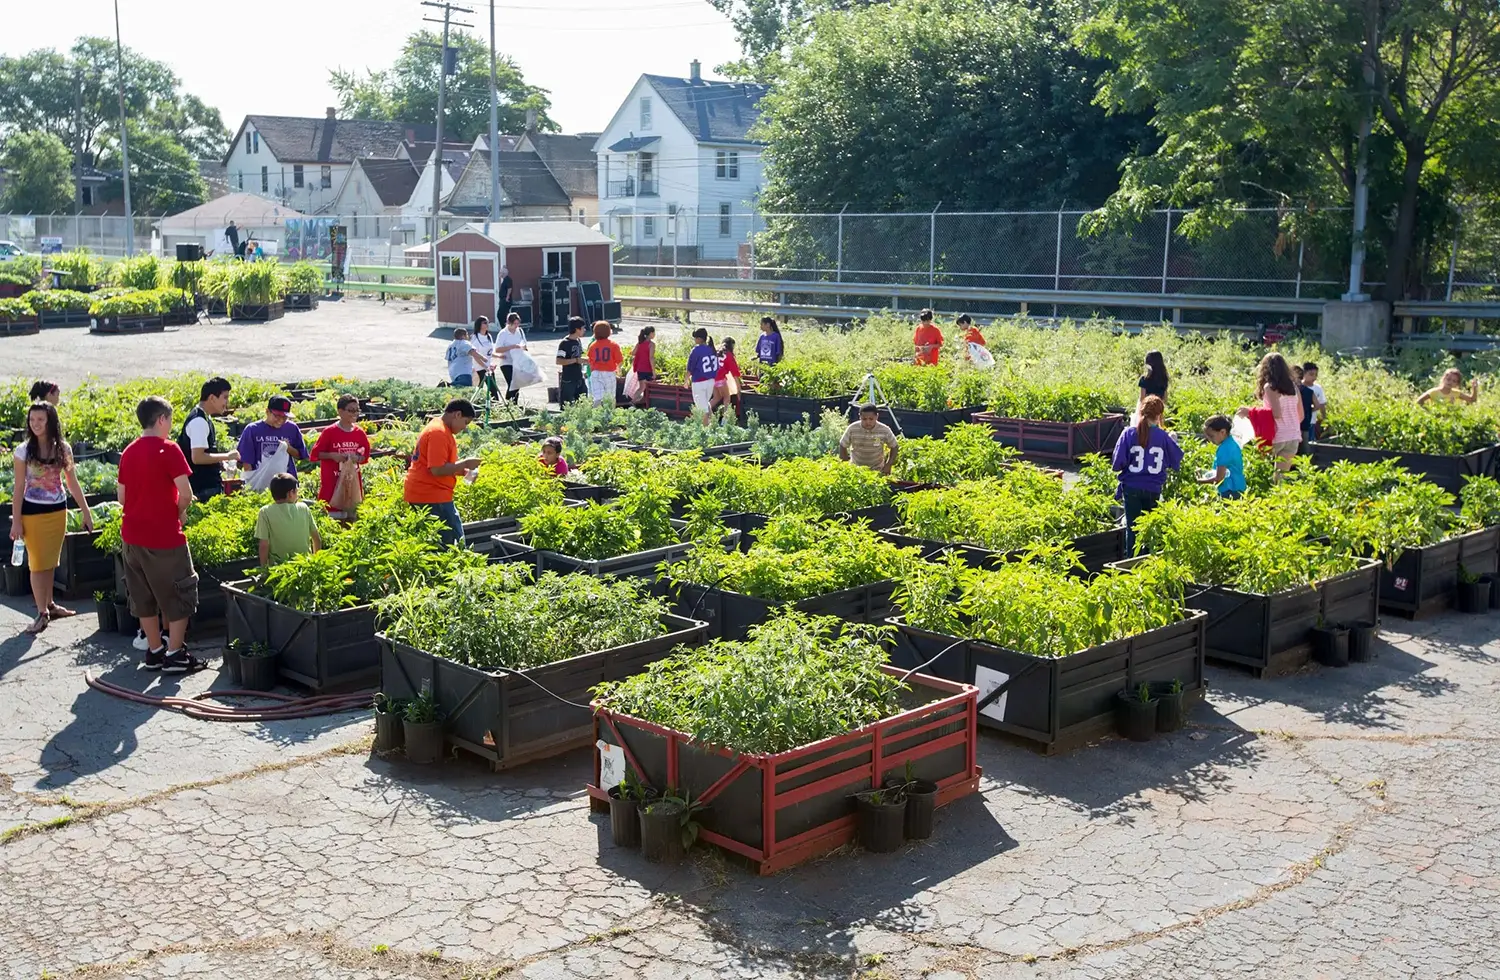 Children and some adults tend to a garden consisting of rows of industrial crates repurposed as raised beds.